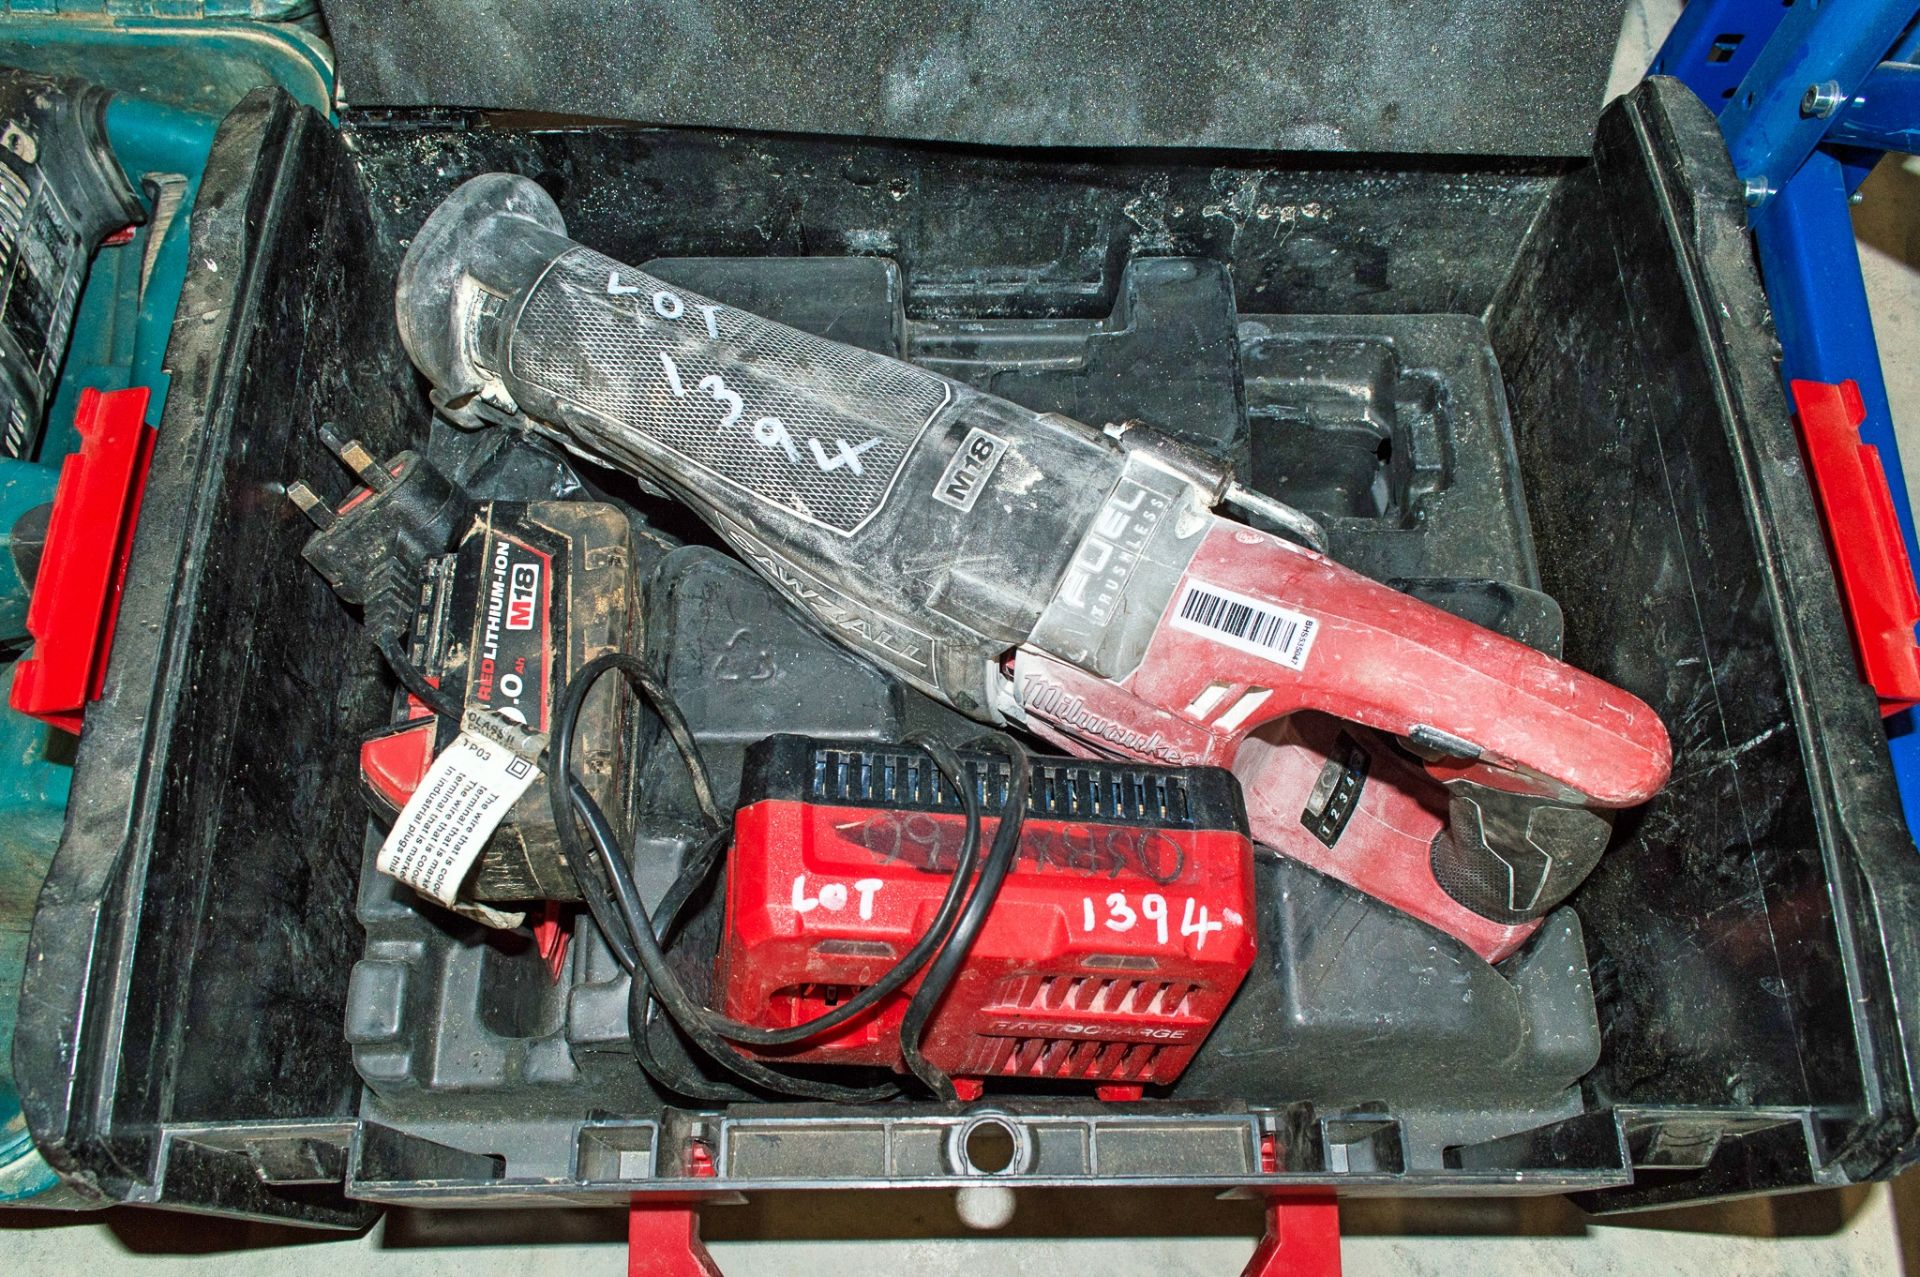 Milwaukee M18-ONESX 18v cordless reciprocating saw c/w carry case 02310206 ** No battery or